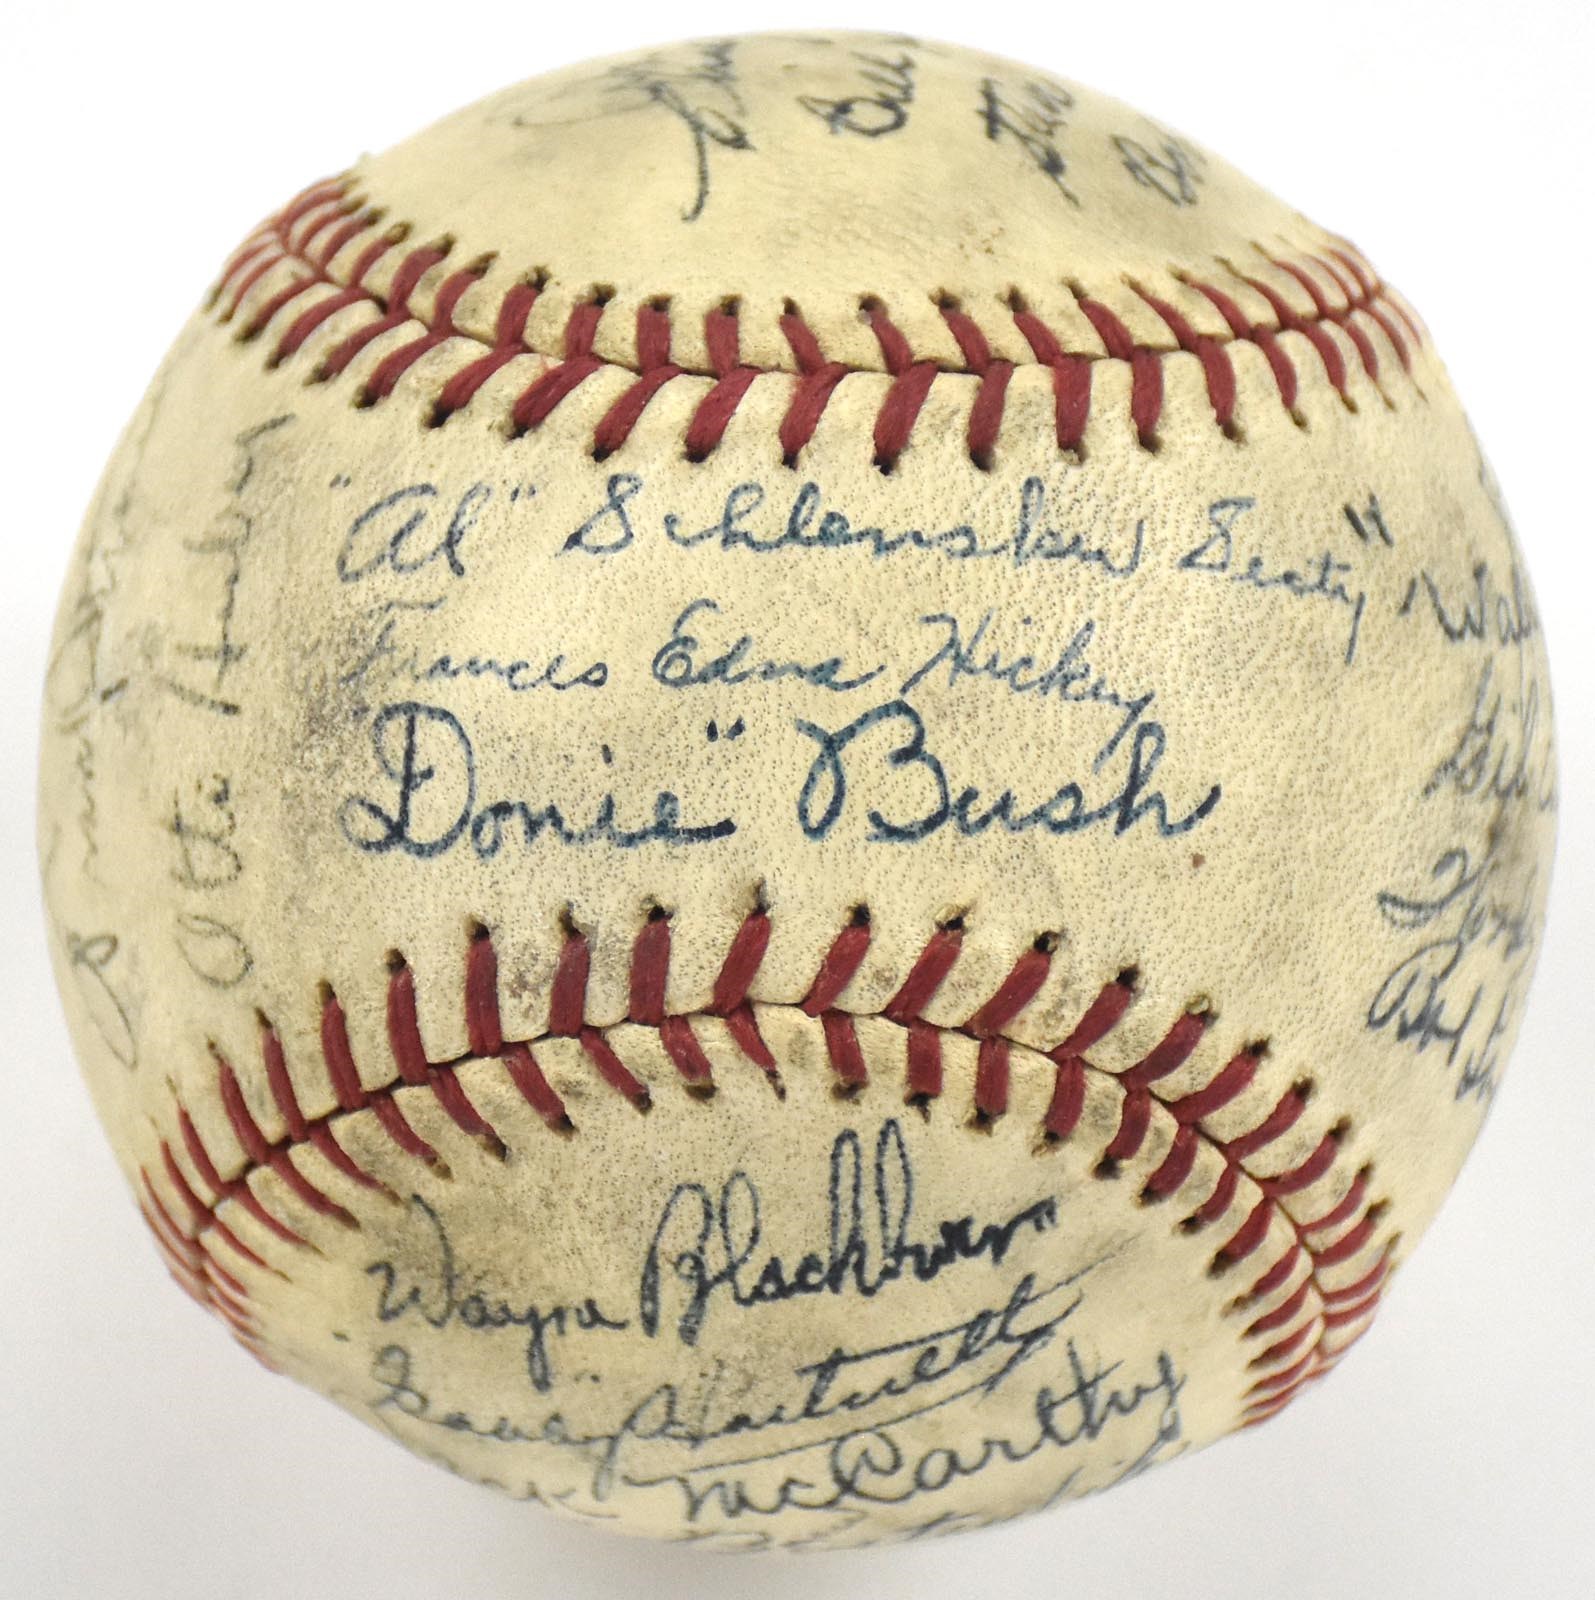 1942 Indianapolis Indians Team Signed Baseball with Gabby Hartnett and Donnie Bush